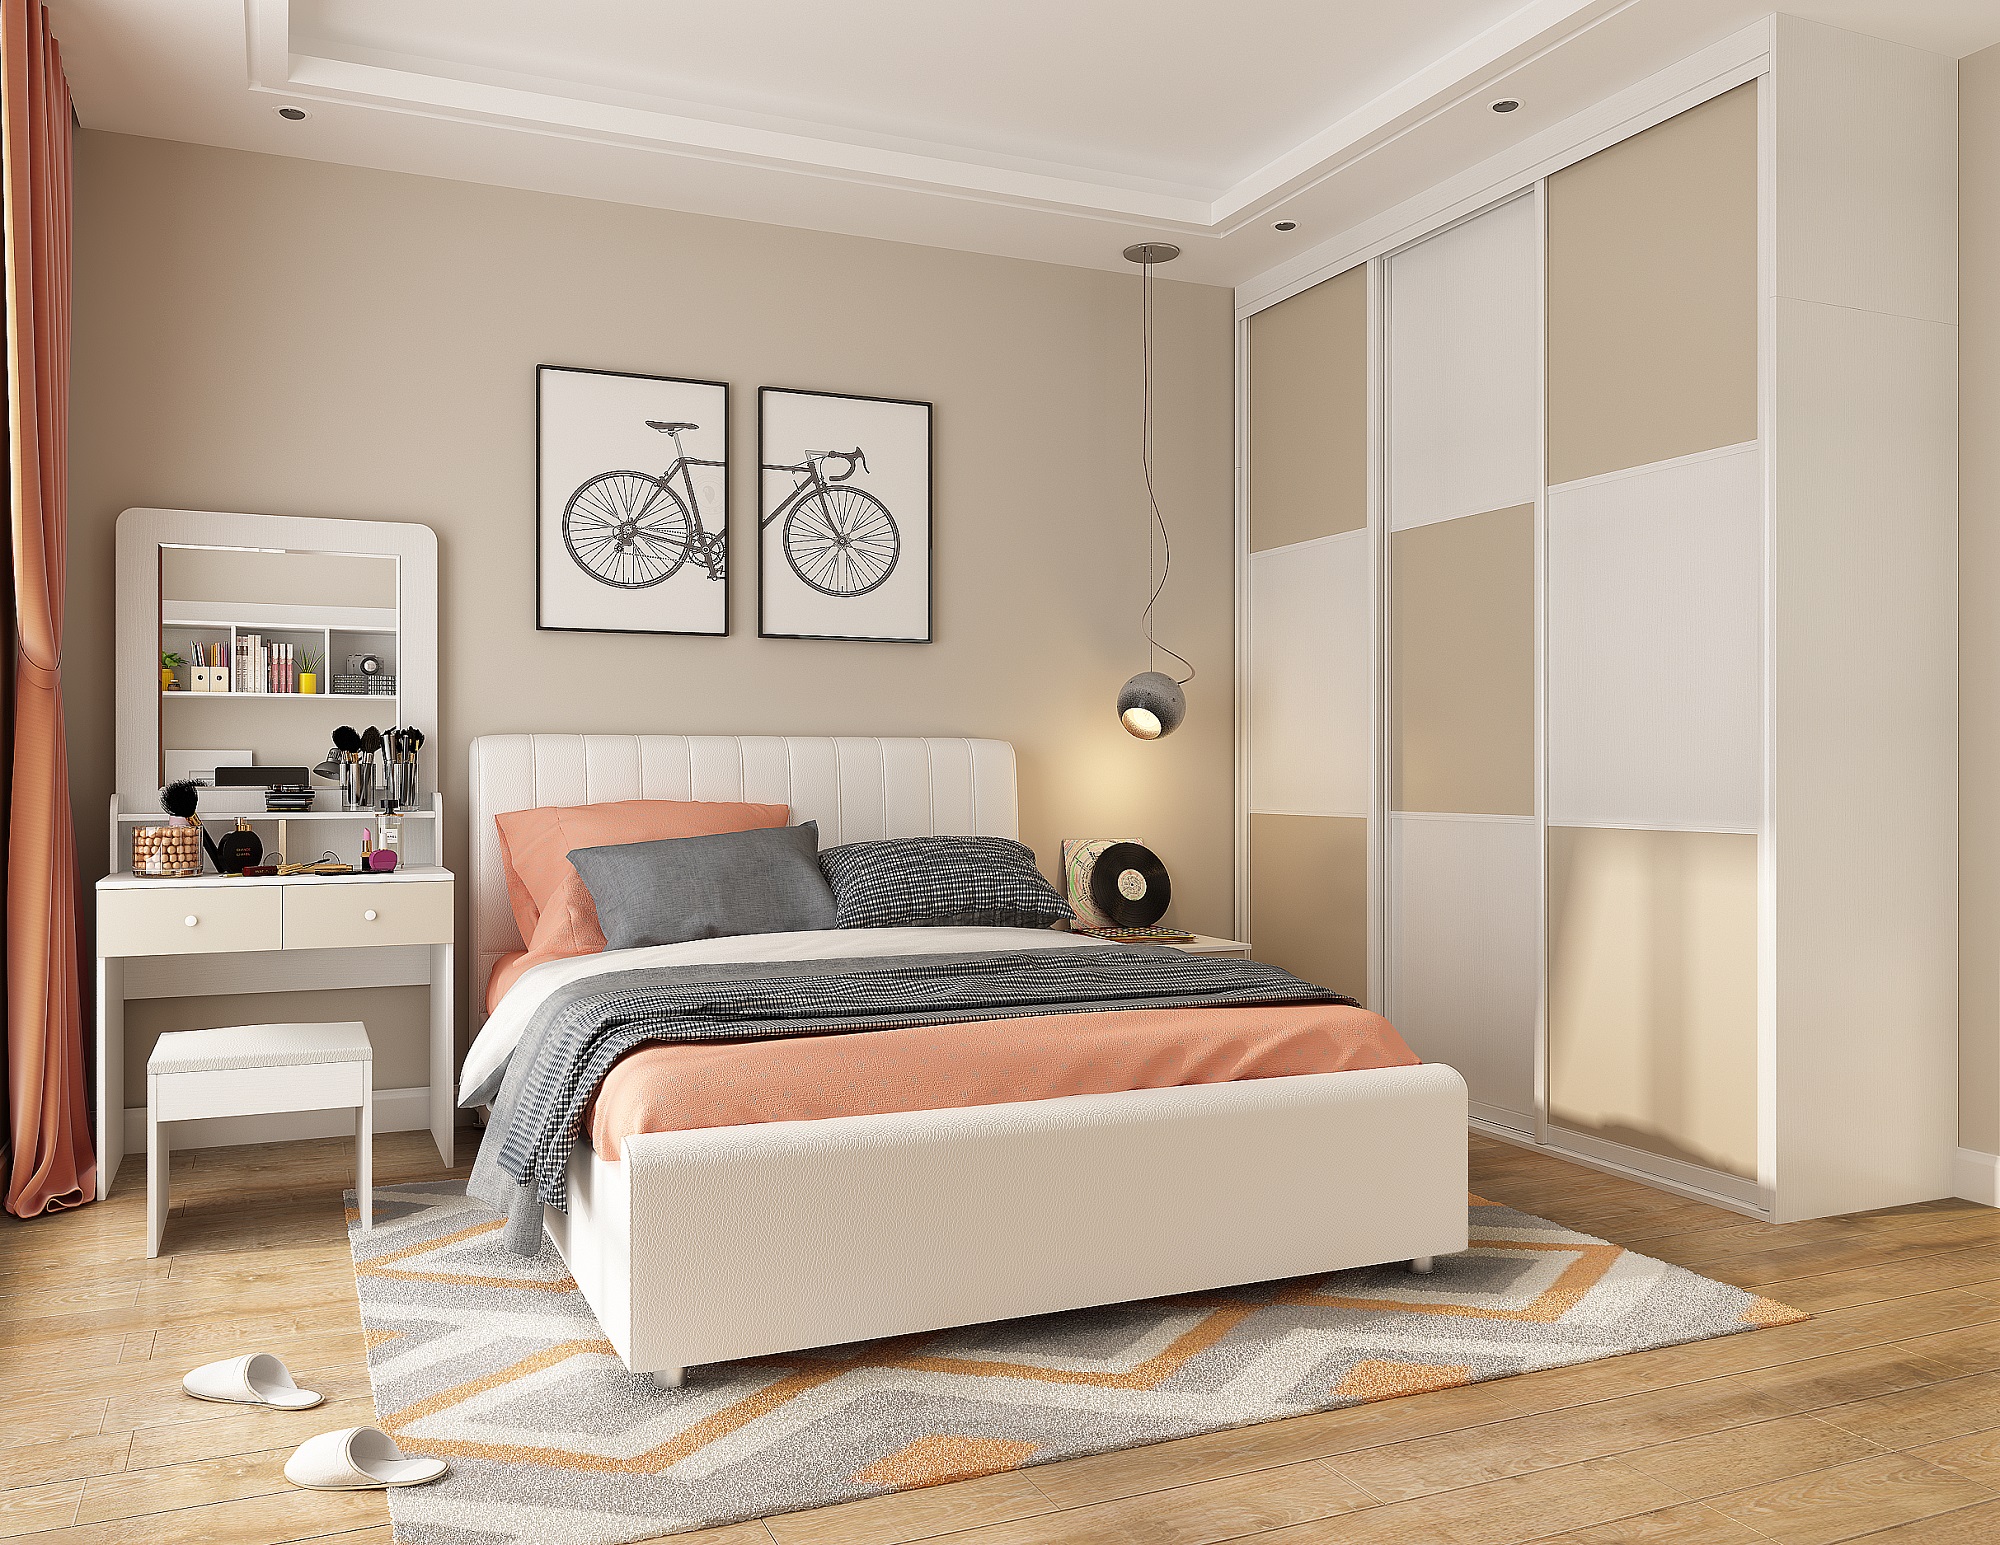 The Secret to the Decoration of Small-sized Bedroom. How to Design a 10㎡ Bedroom？